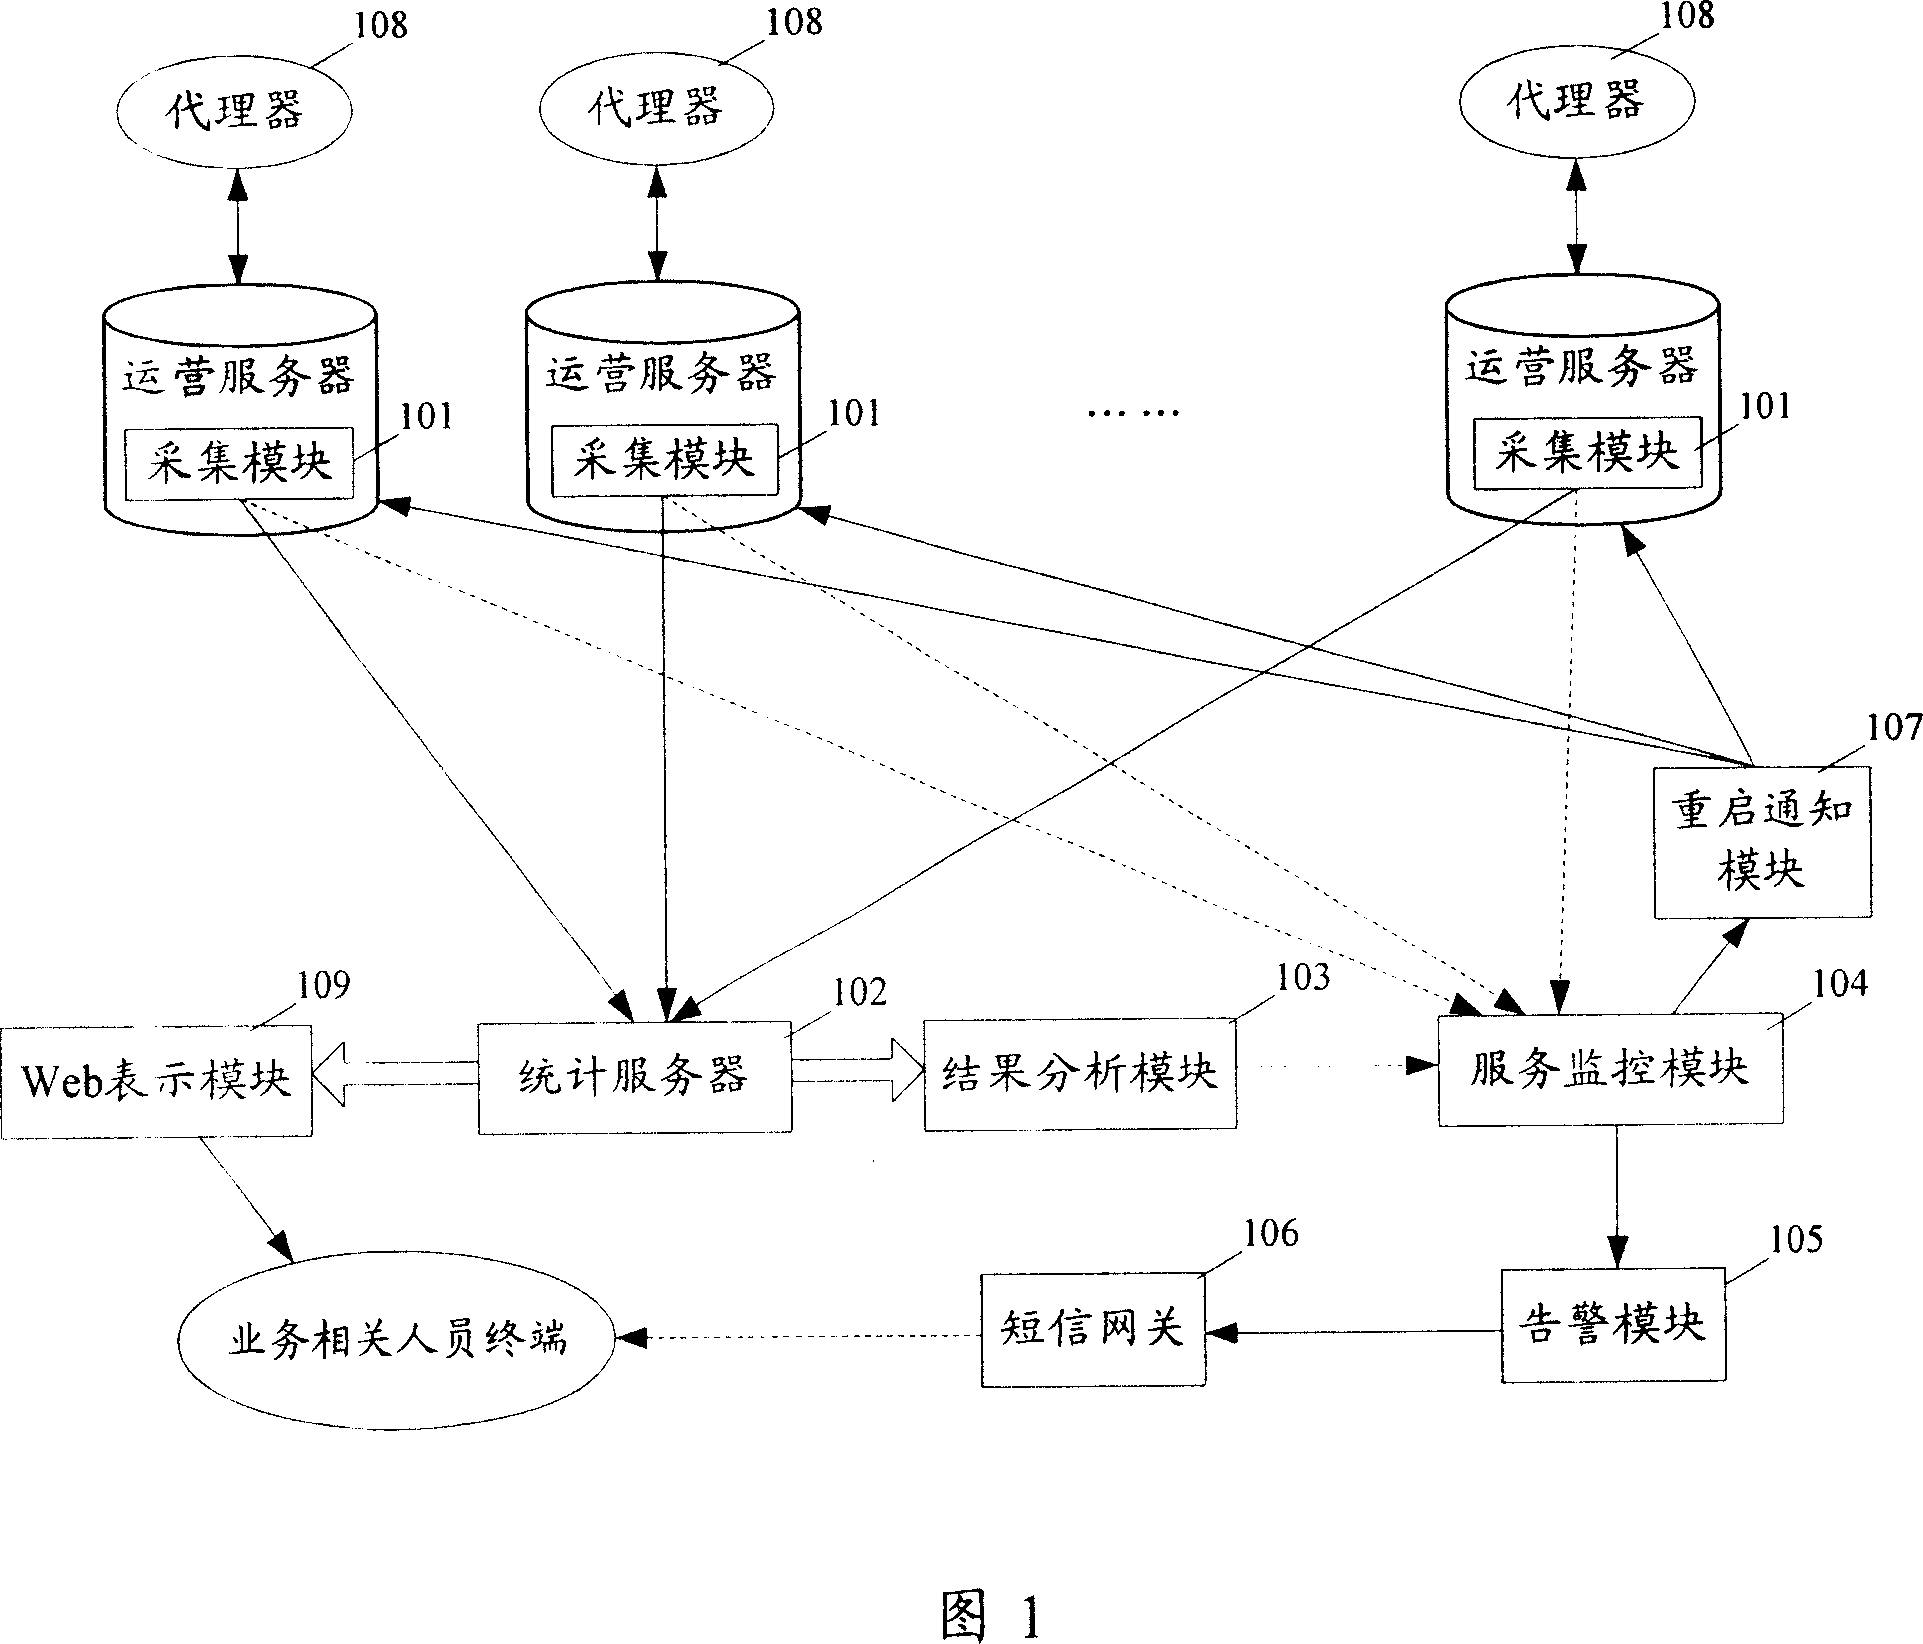 Method and system for monitoring Internet service